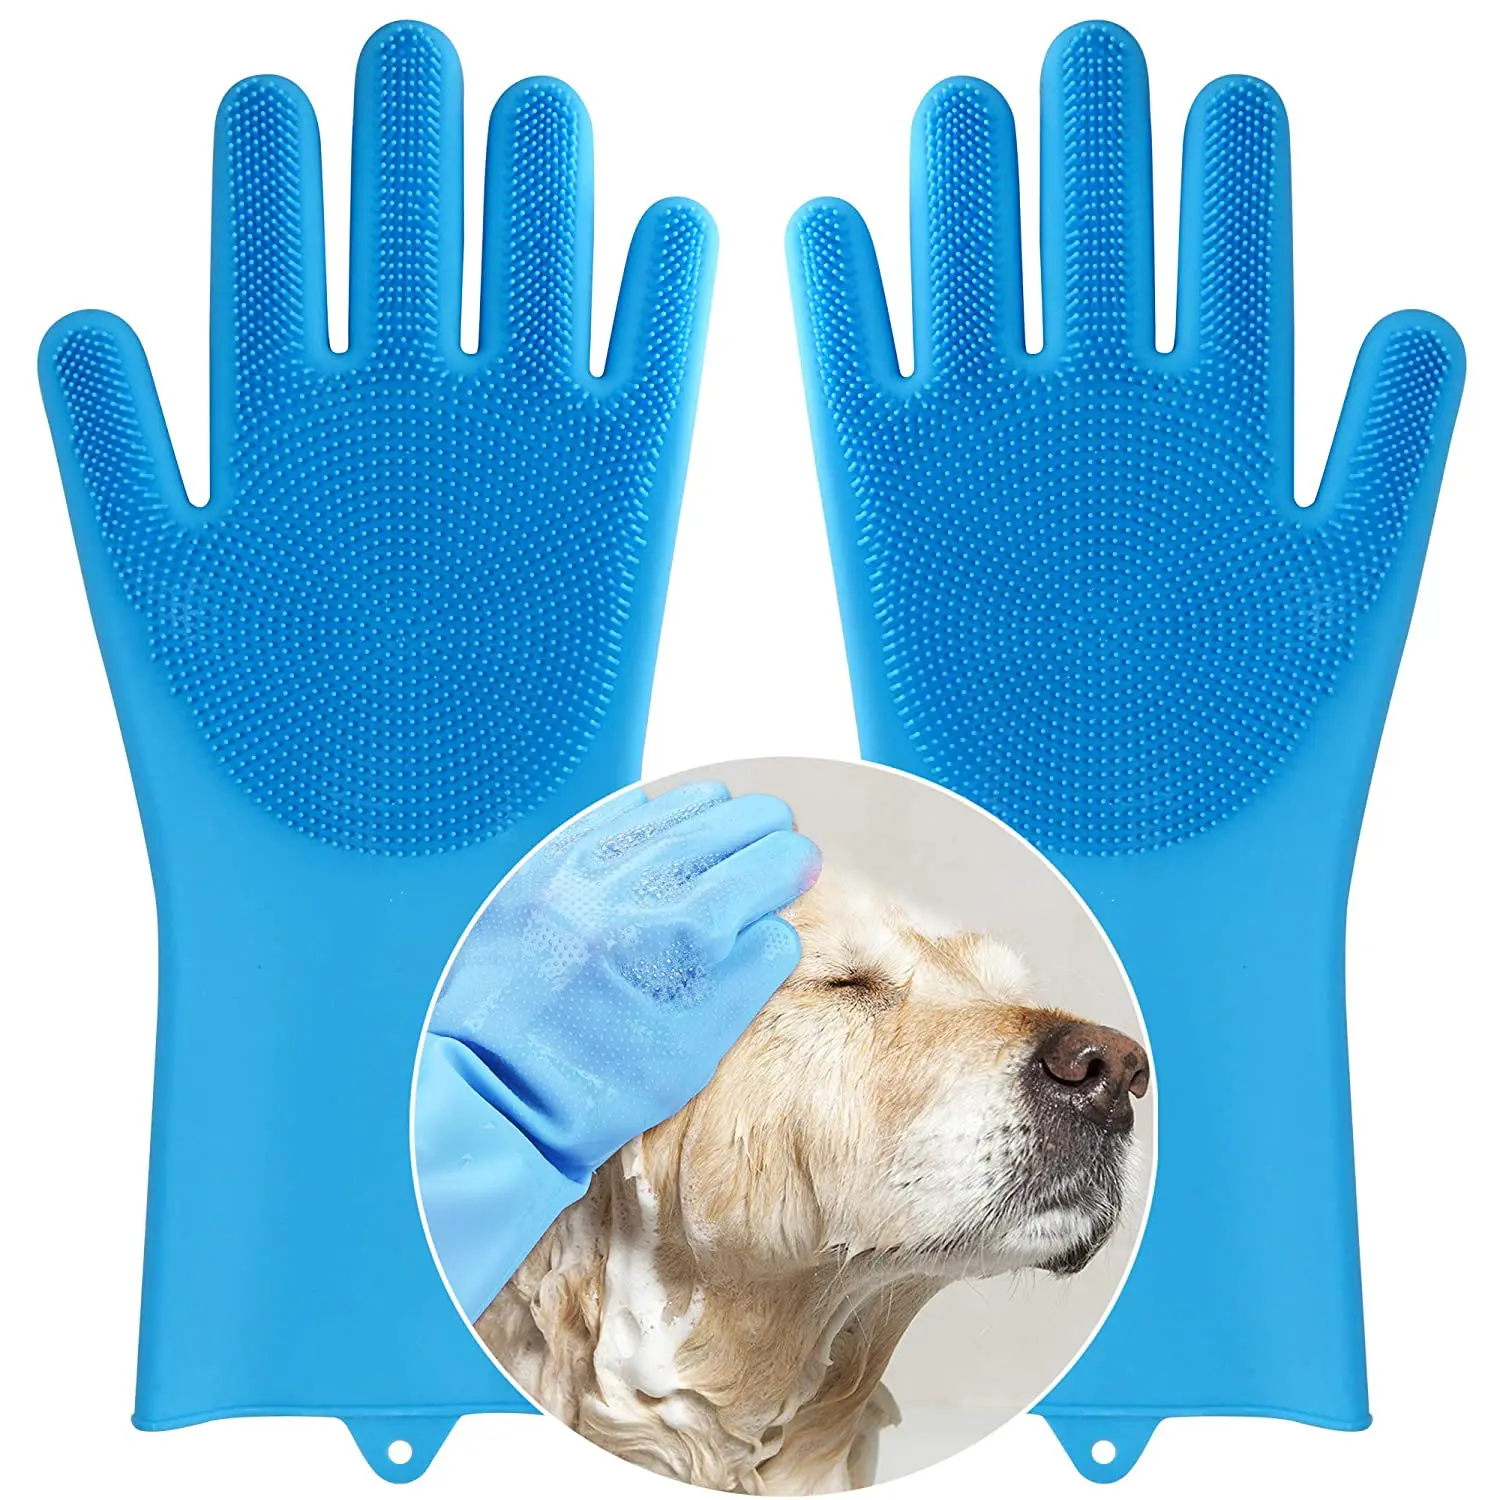 

Rubber pet shower brush environmentally friendly silicone magic massage pet grooming cleaning gloves dog cat pet supplies